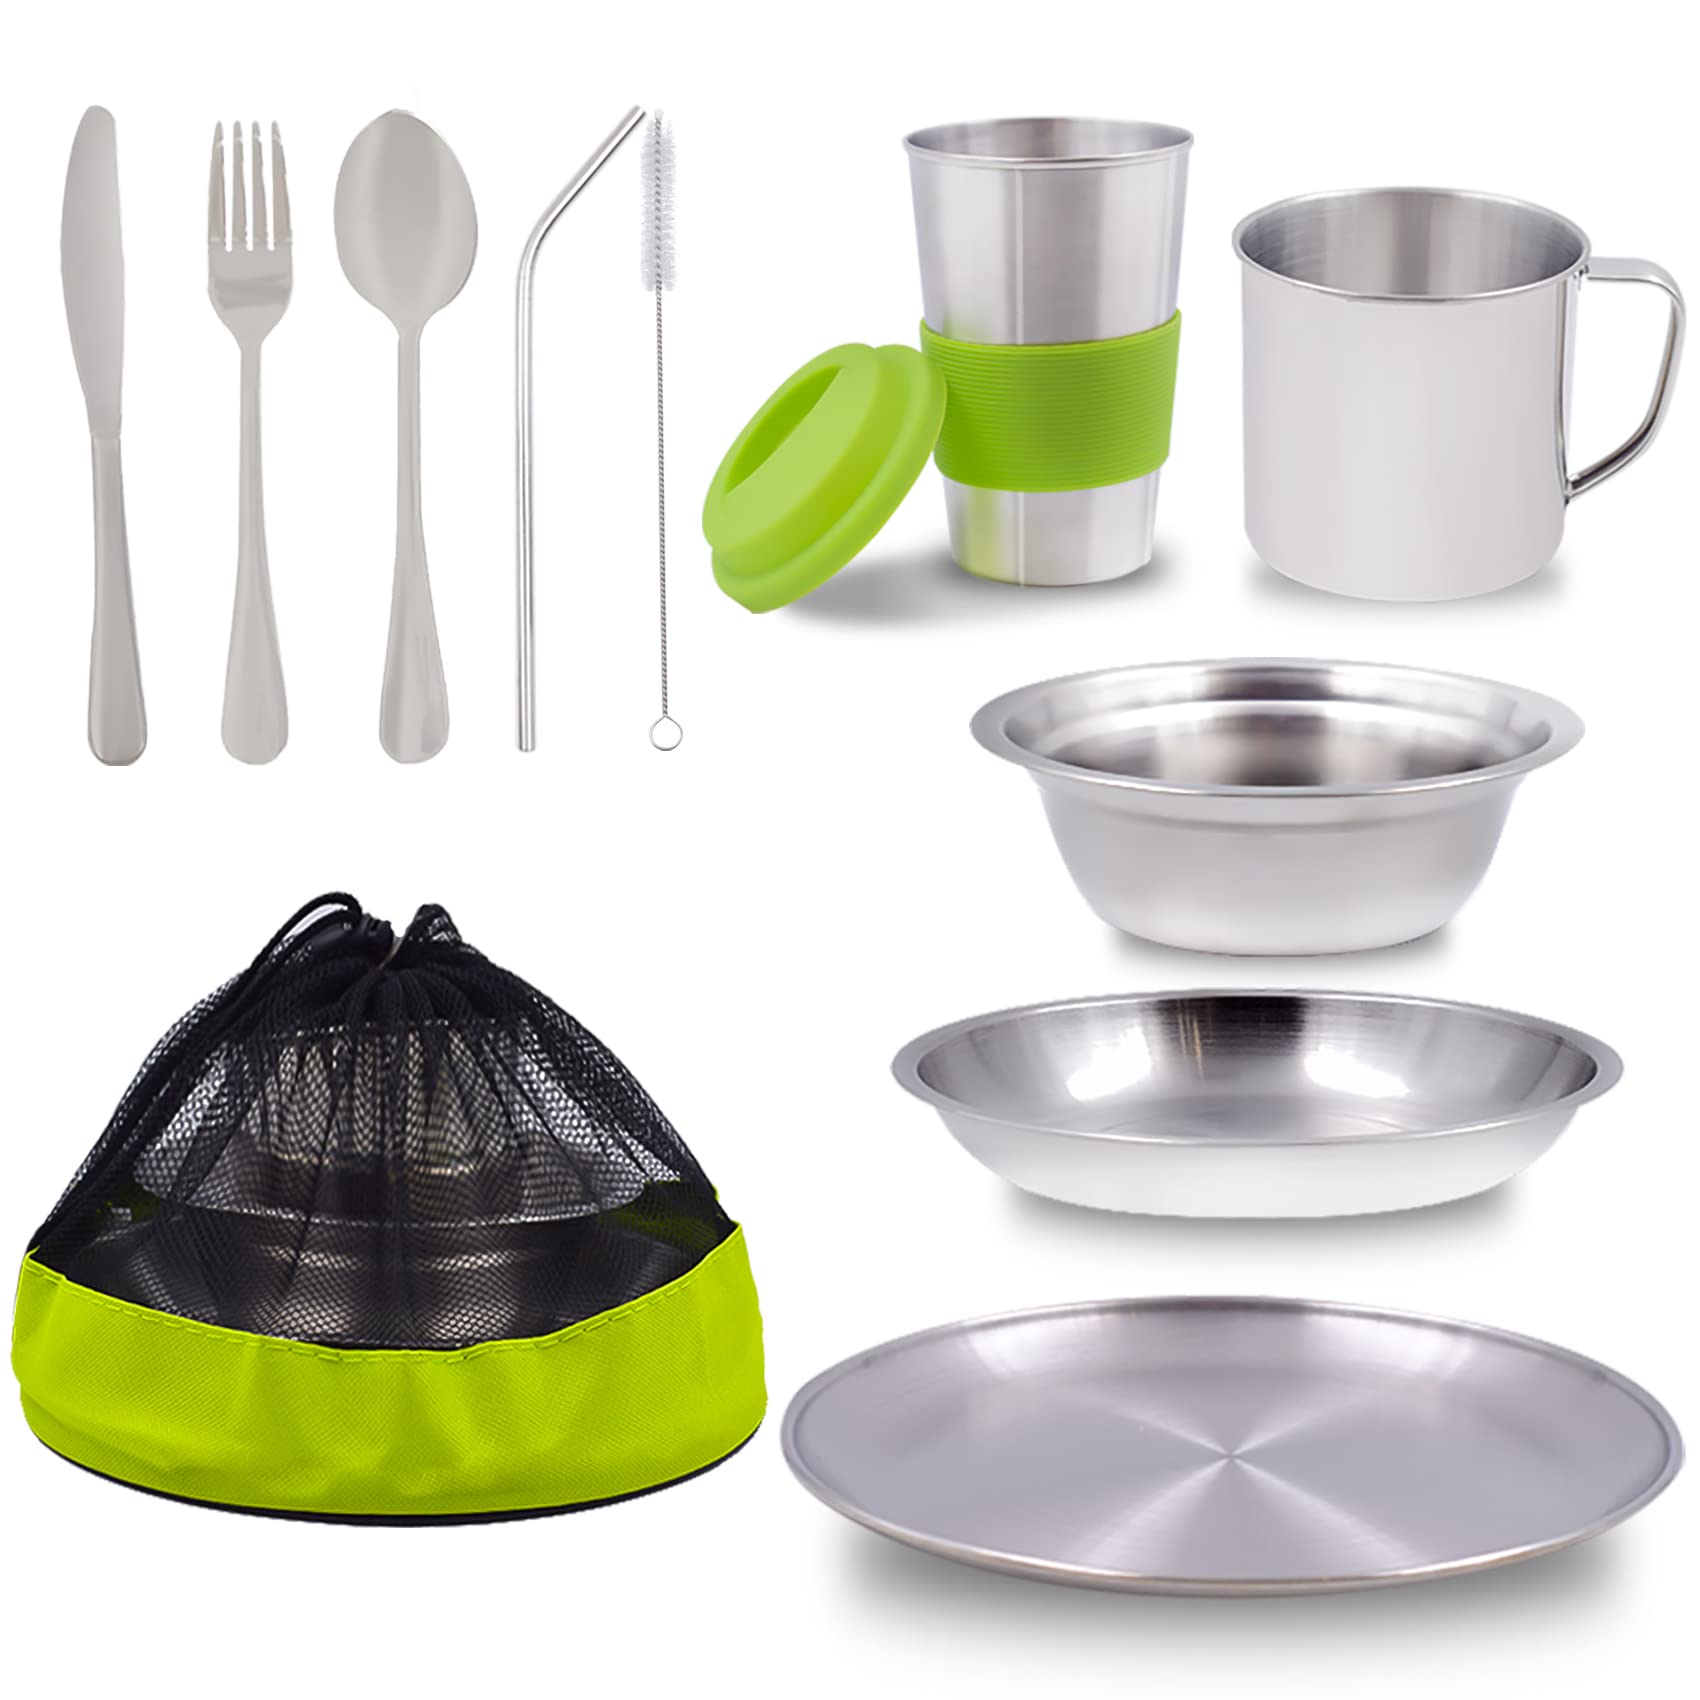 Stainless Steel Plates and Bowls Camping Dinnerware Set for Kids